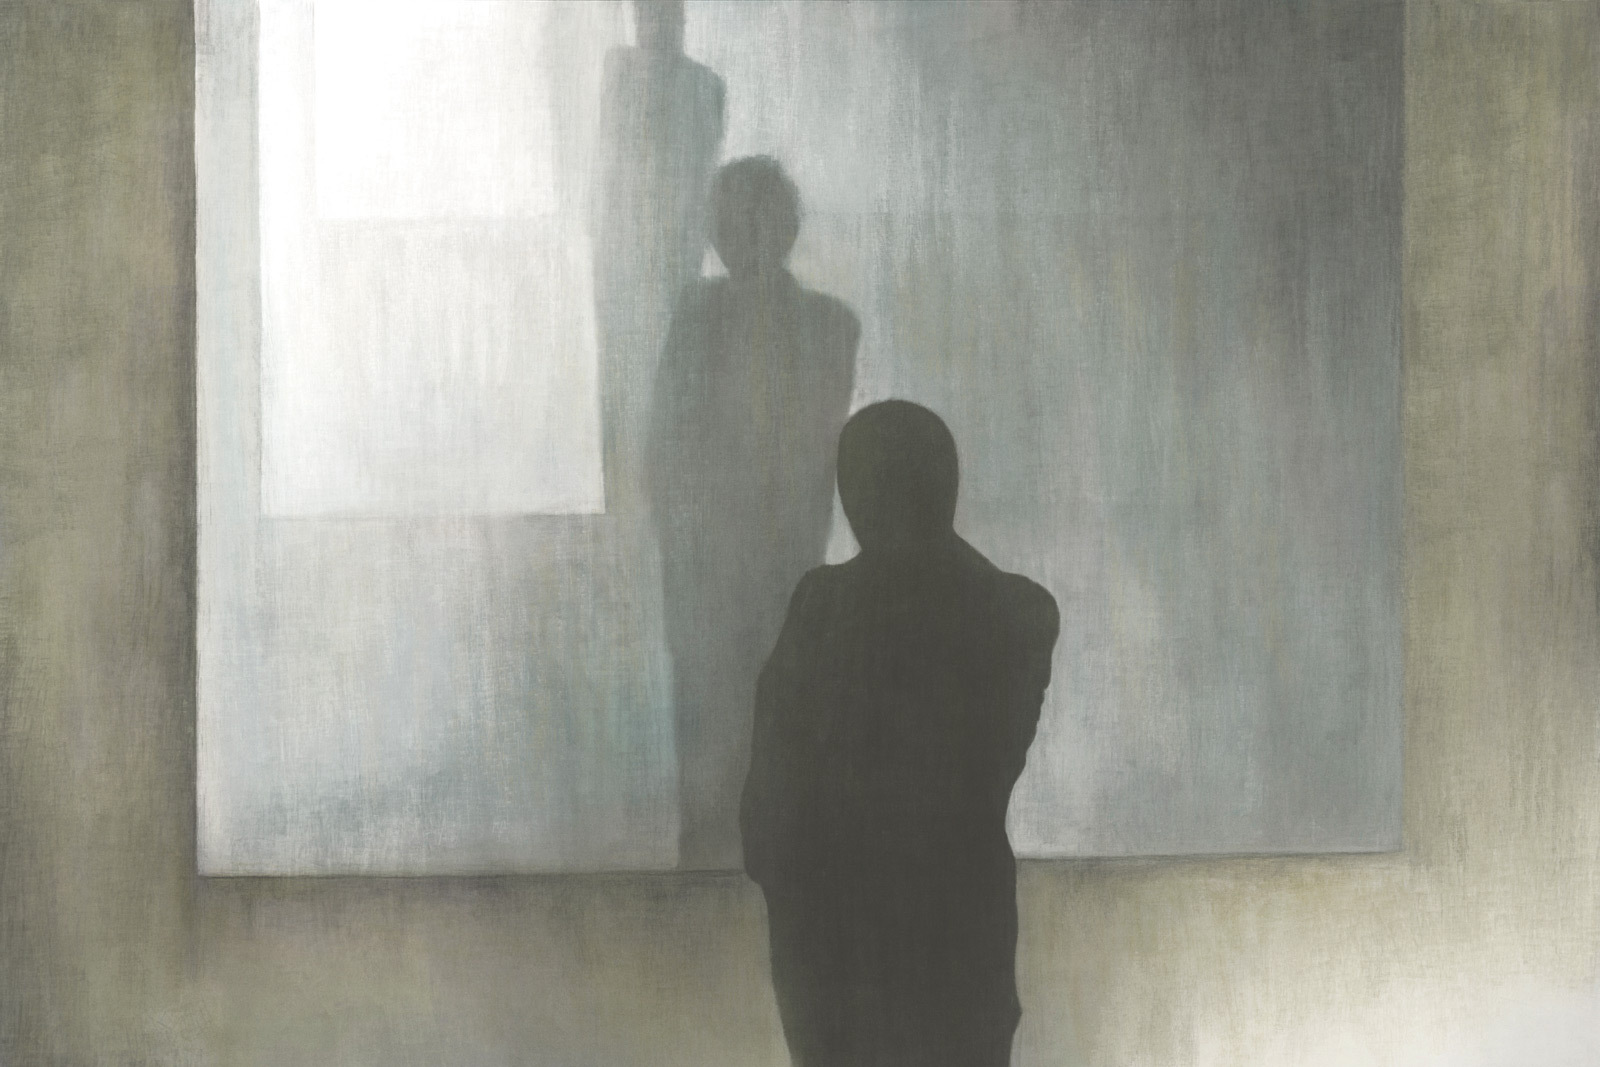 A painting in muted gray tones of the same male figure repeated, as if reflected in a mirror.